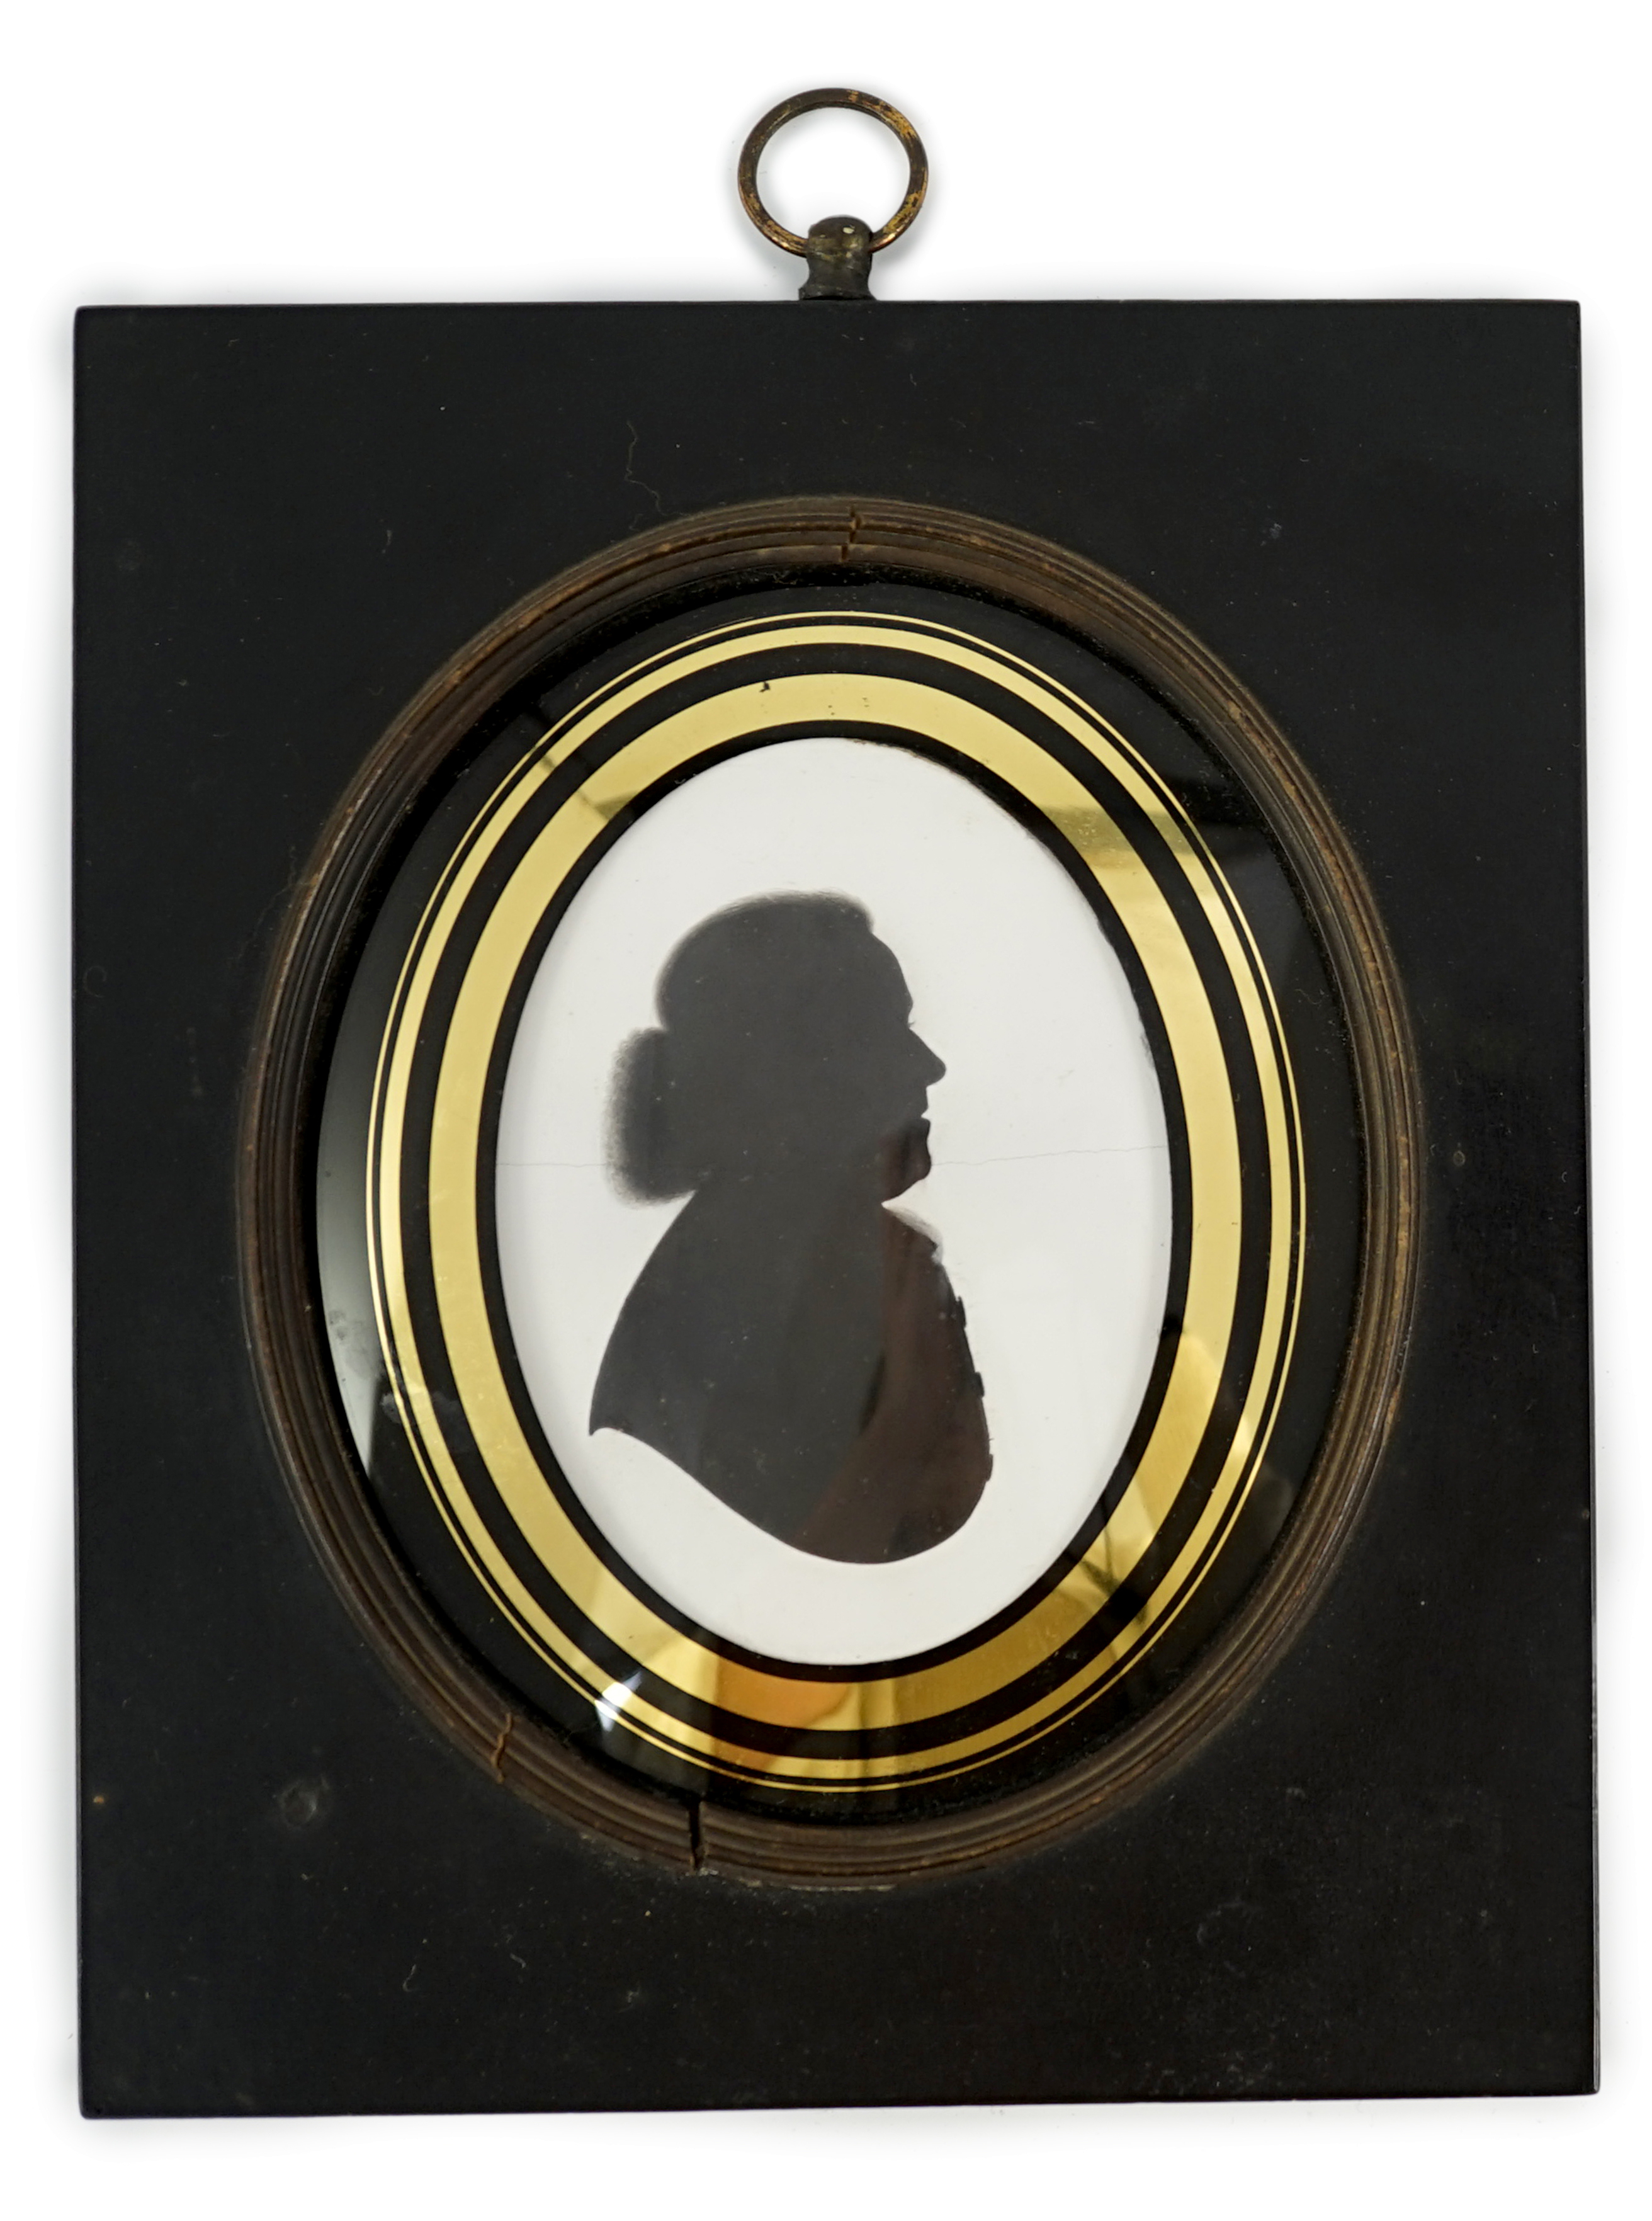 John Miers (1756-1821), Silhouette of a gentleman, painted plaster, 8.2 x 6cm.